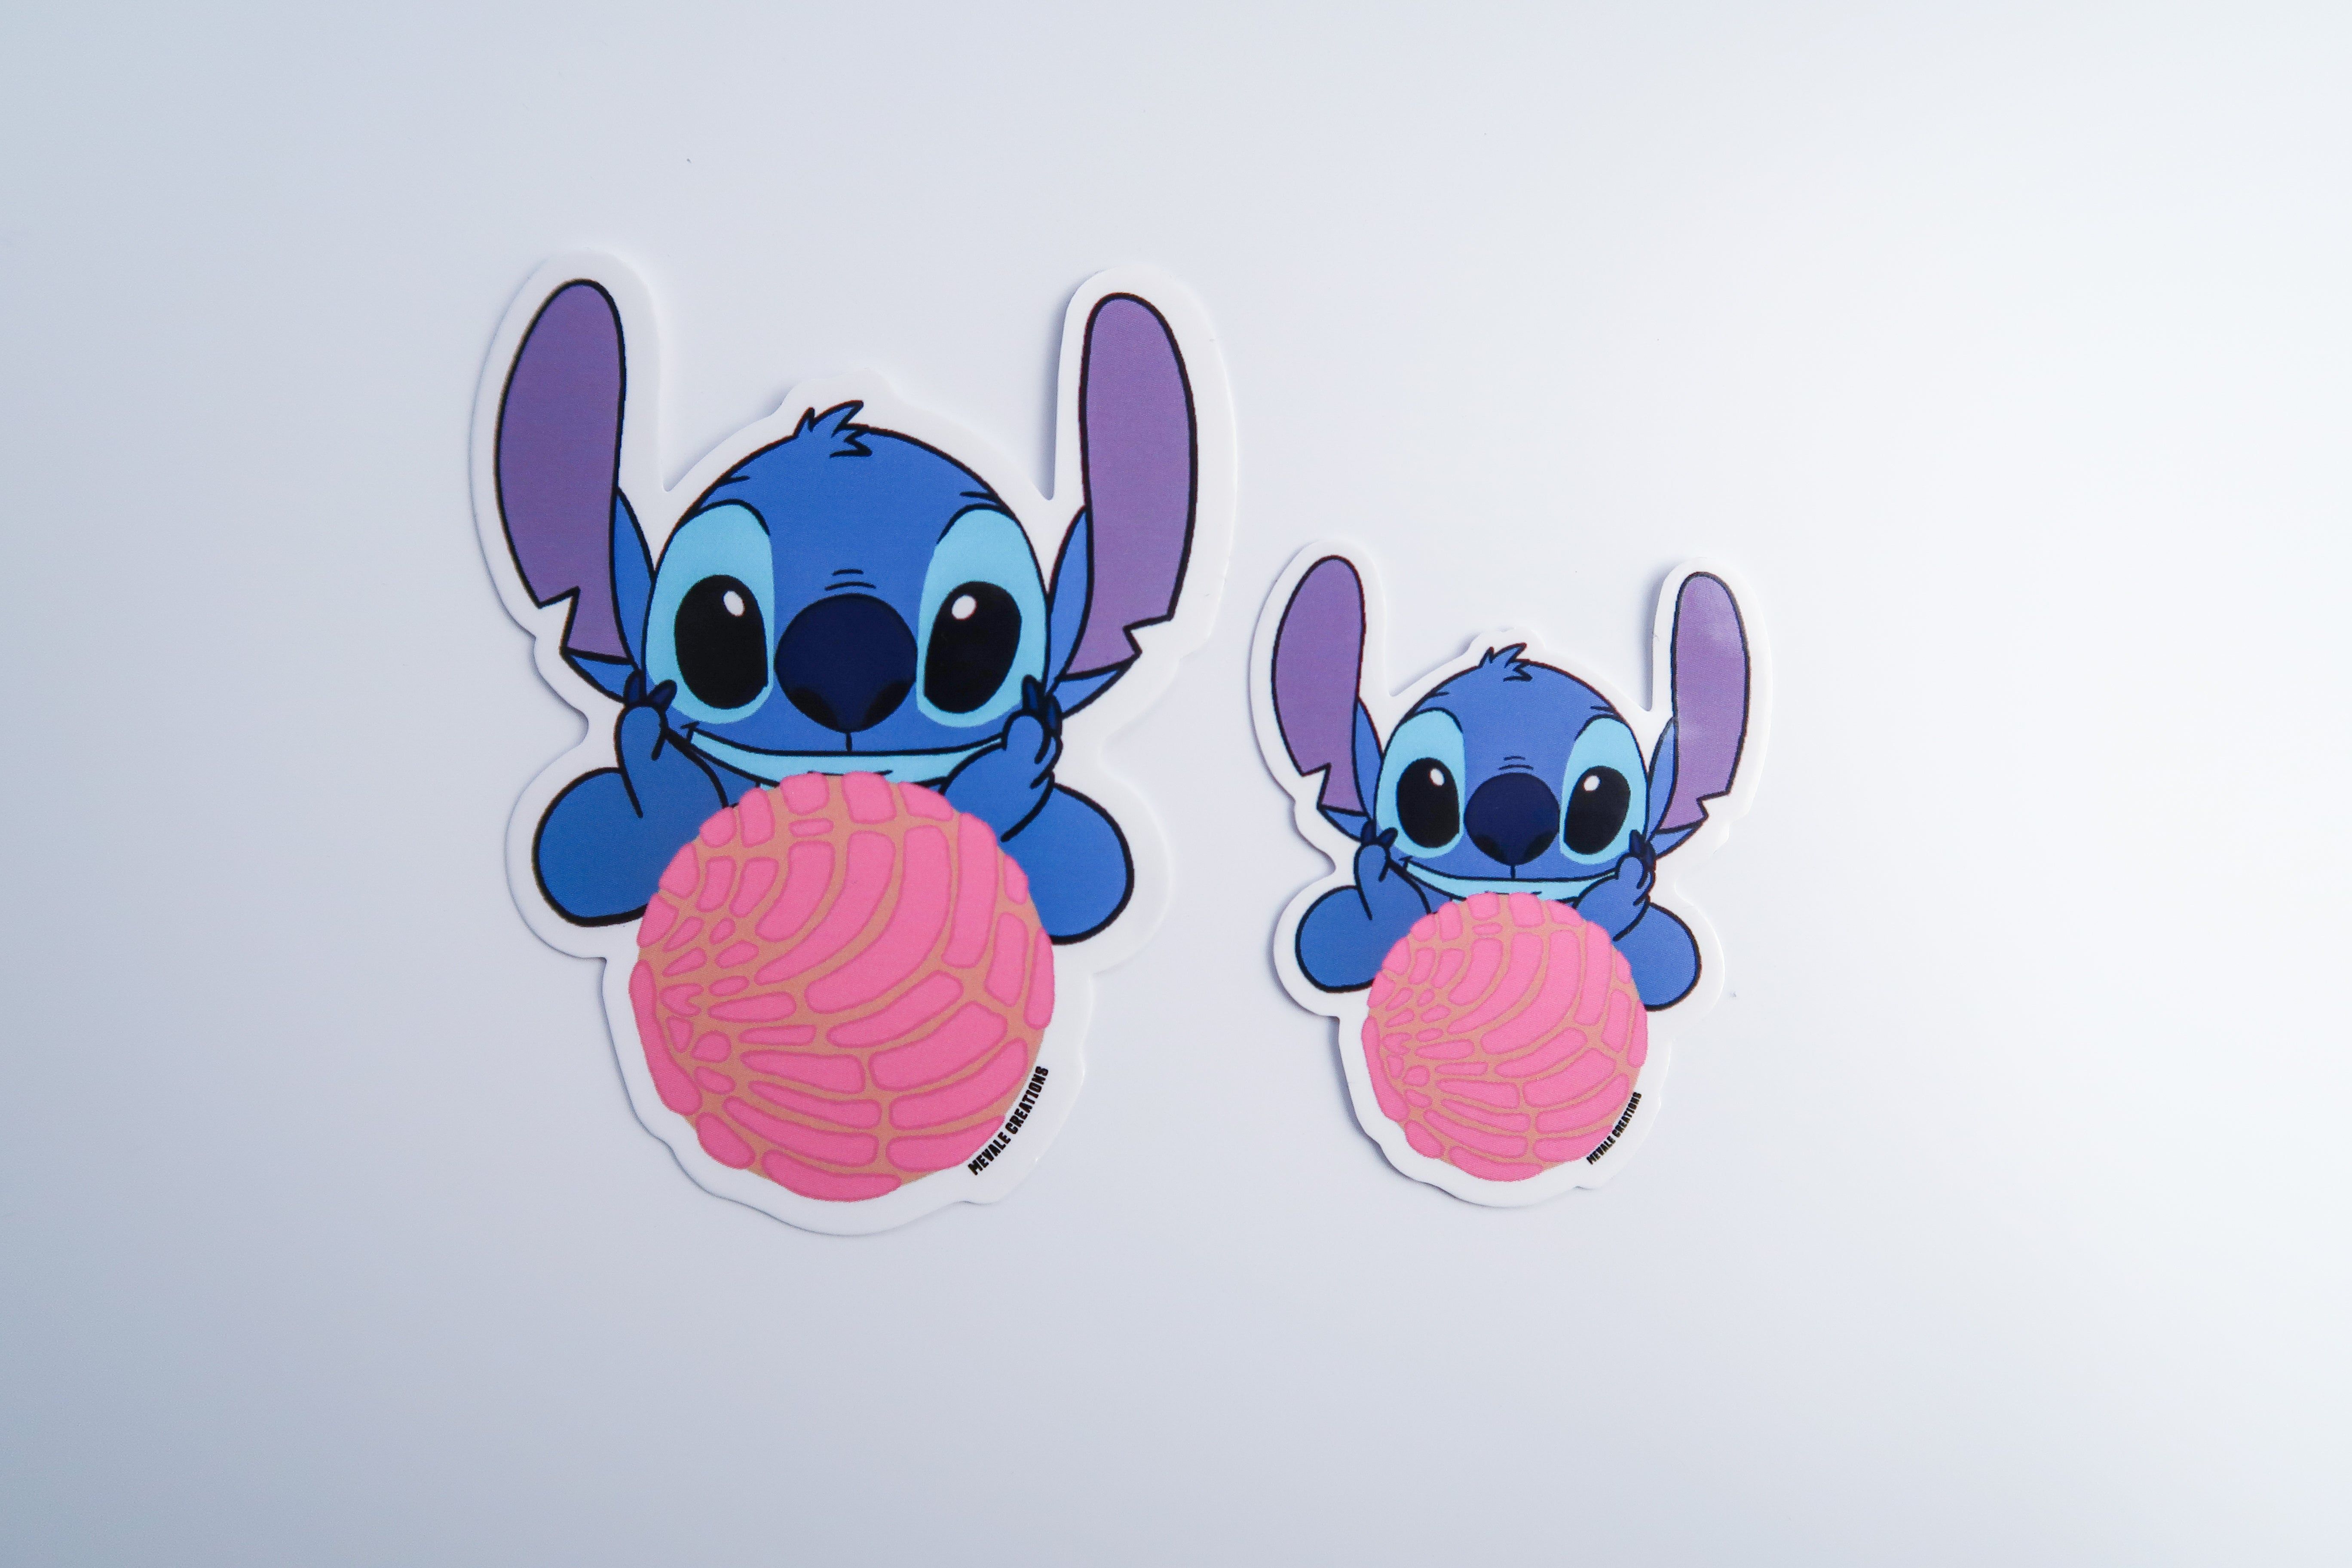 A sticker of two blue and pink characters - Stitch, sticker